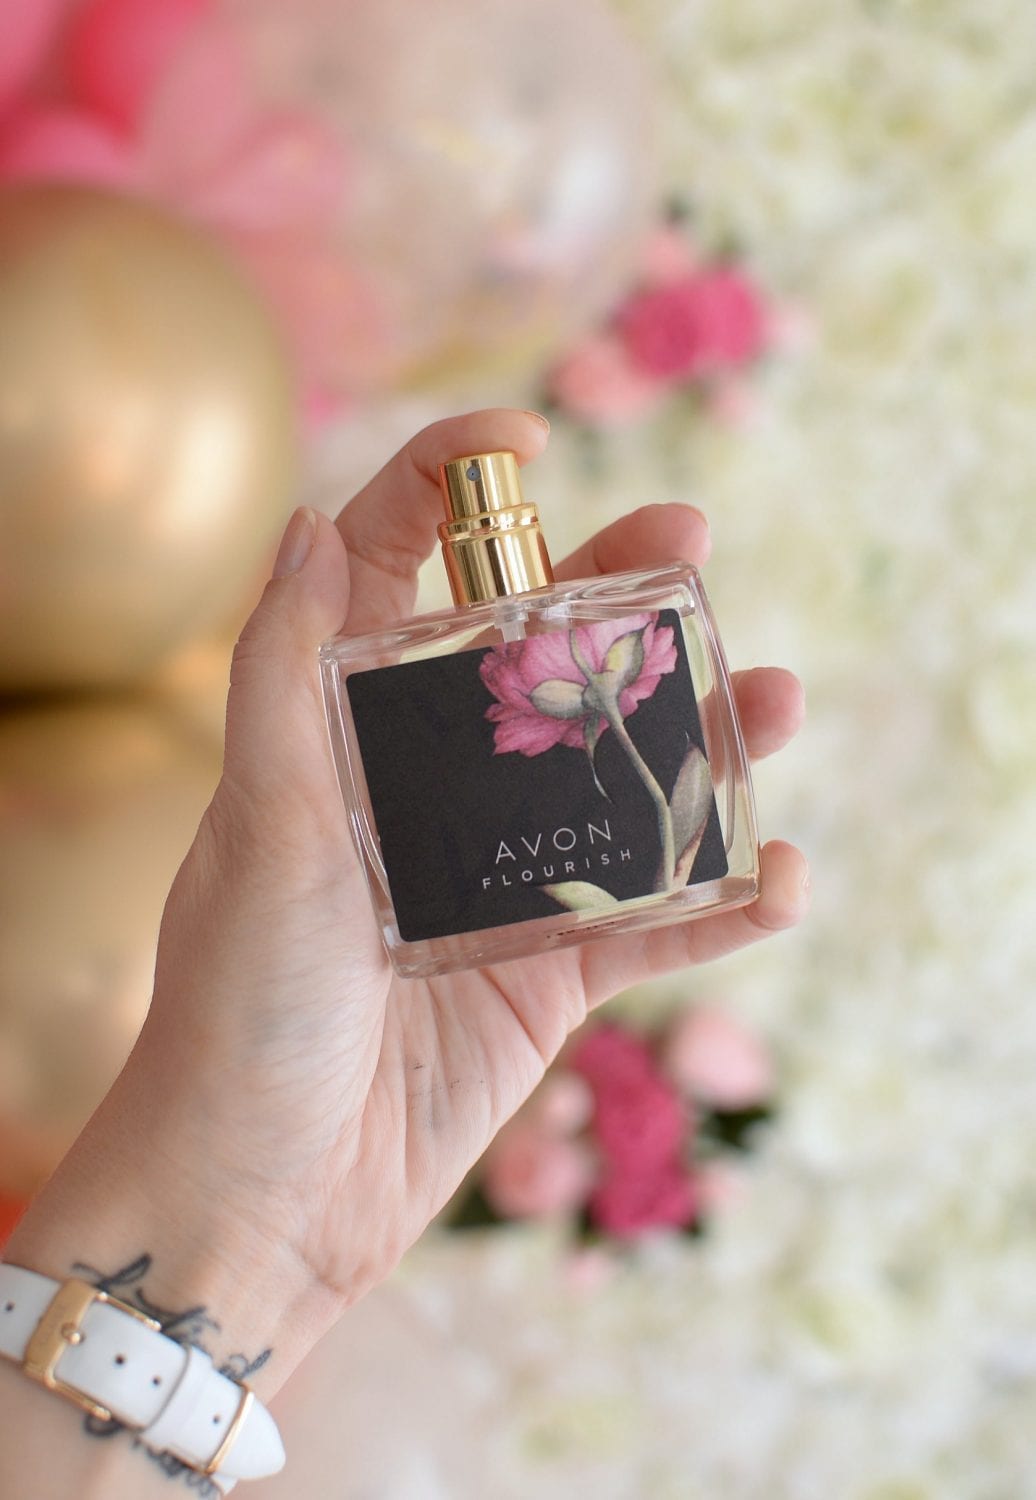 How To Find Your New Signature Scent